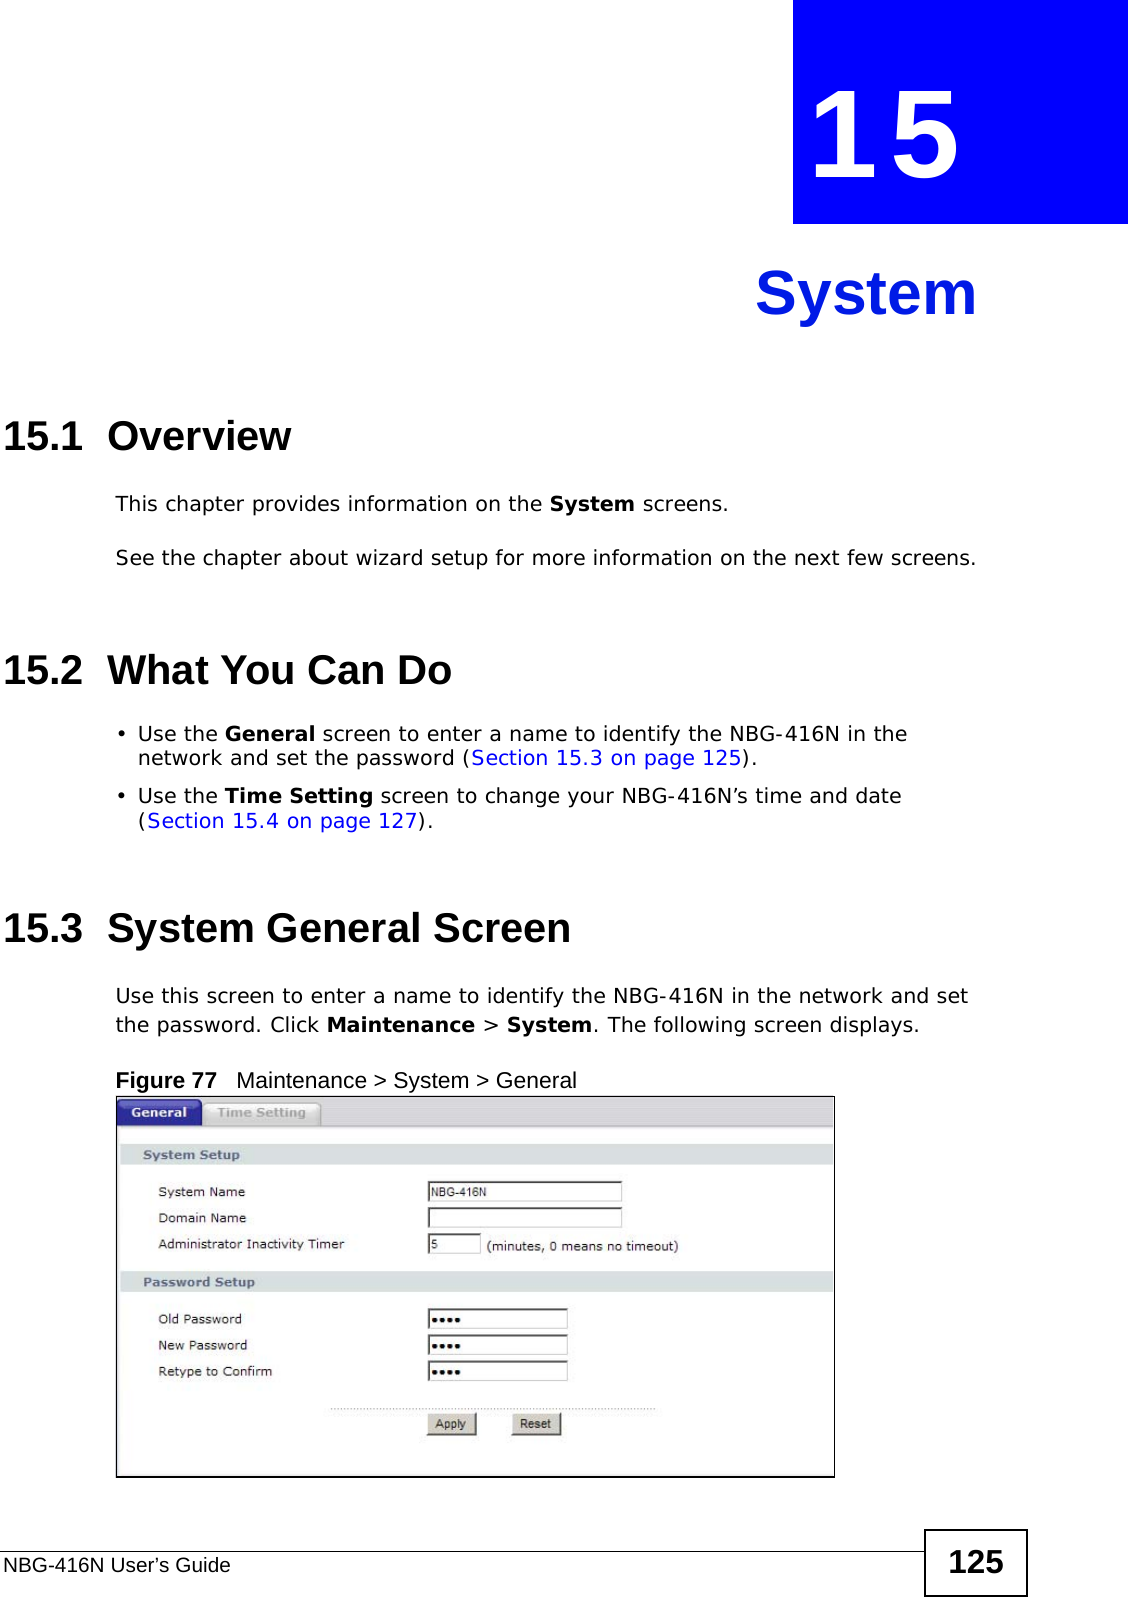 NBG-416N User’s Guide 125CHAPTER  15 System15.1  OverviewThis chapter provides information on the System screens. See the chapter about wizard setup for more information on the next few screens.15.2  What You Can Do•Use the General screen to enter a name to identify the NBG-416N in the network and set the password (Section 15.3 on page 125).•Use the Time Setting screen to change your NBG-416N’s time and date (Section 15.4 on page 127).15.3  System General Screen Use this screen to enter a name to identify the NBG-416N in the network and set the password. Click Maintenance &gt; System. The following screen displays.Figure 77   Maintenance &gt; System &gt; General 